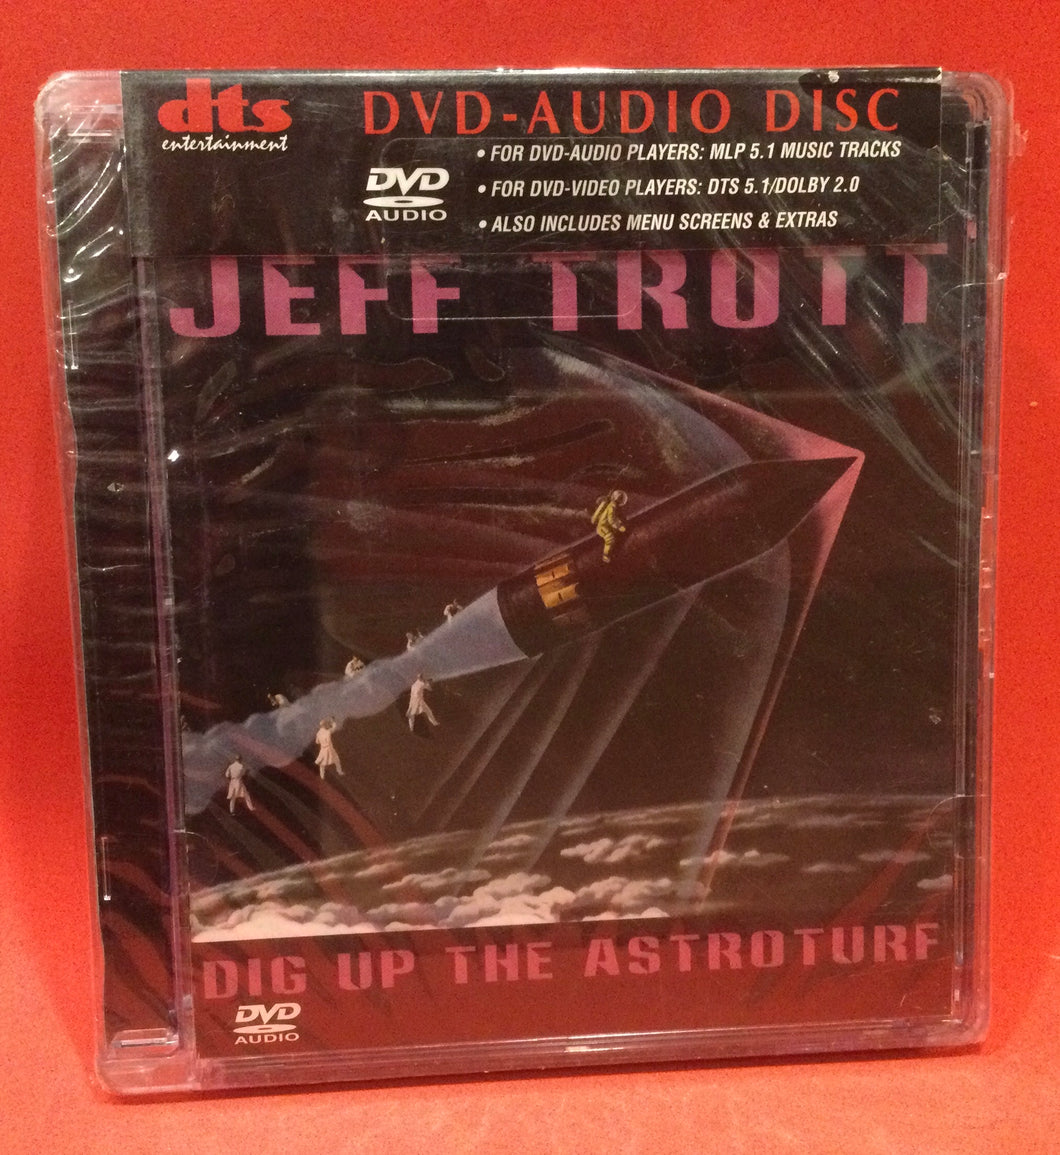 TROTT, JEFF - DIG UP THE ASTROTURF - DVD-AUDIO DISC (SEALED)